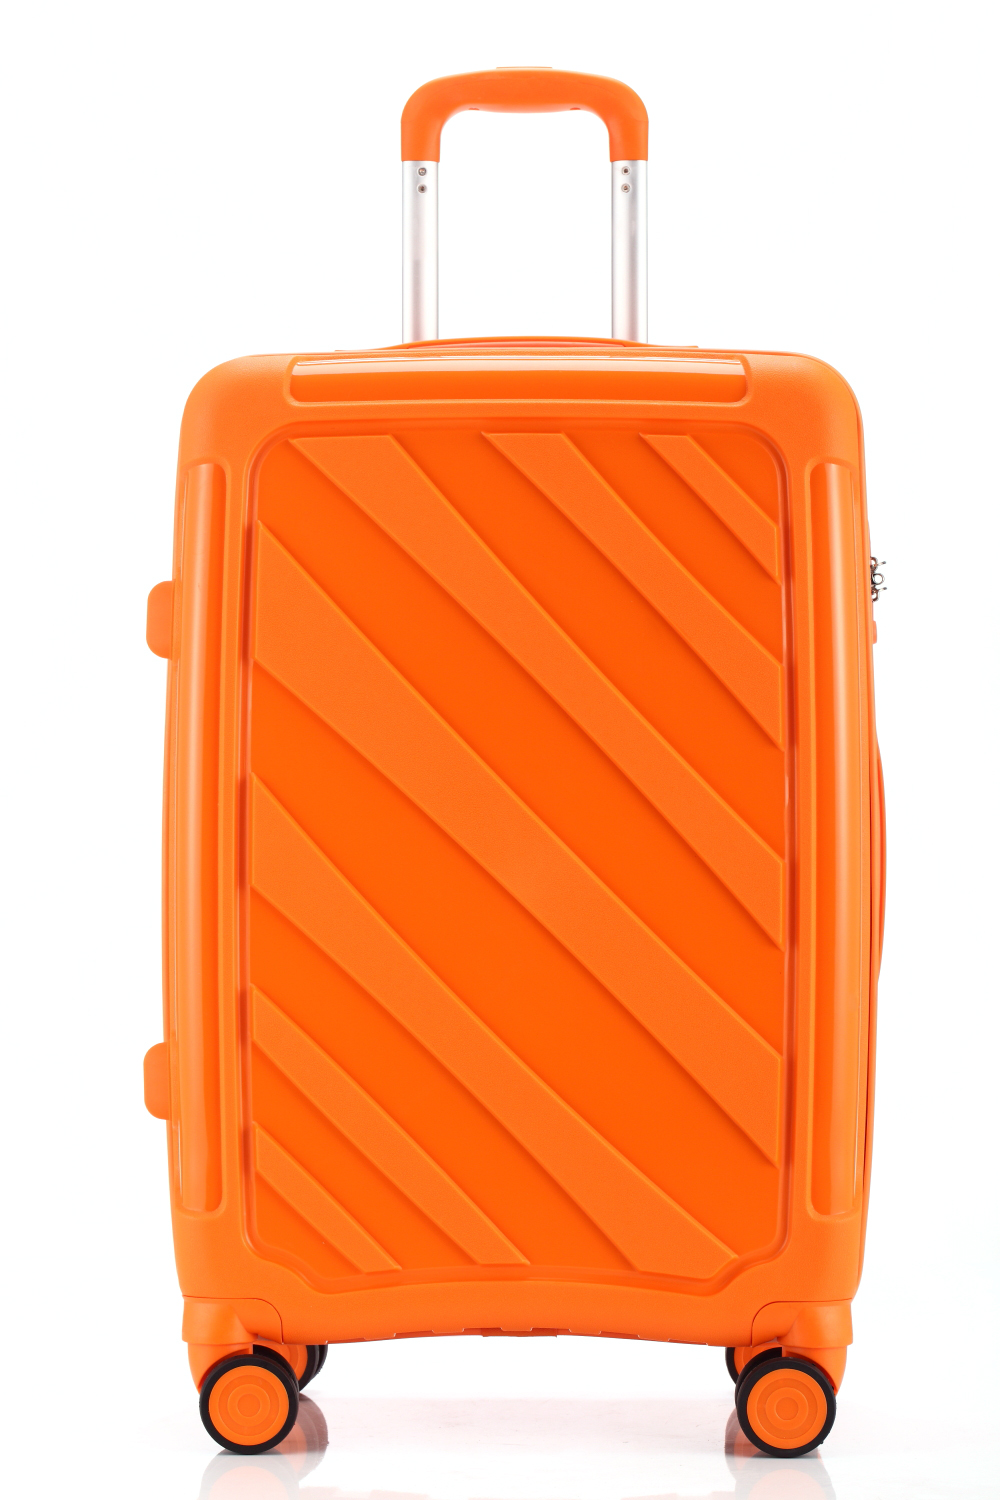 yanteng classic PP traveling luggage in orange color